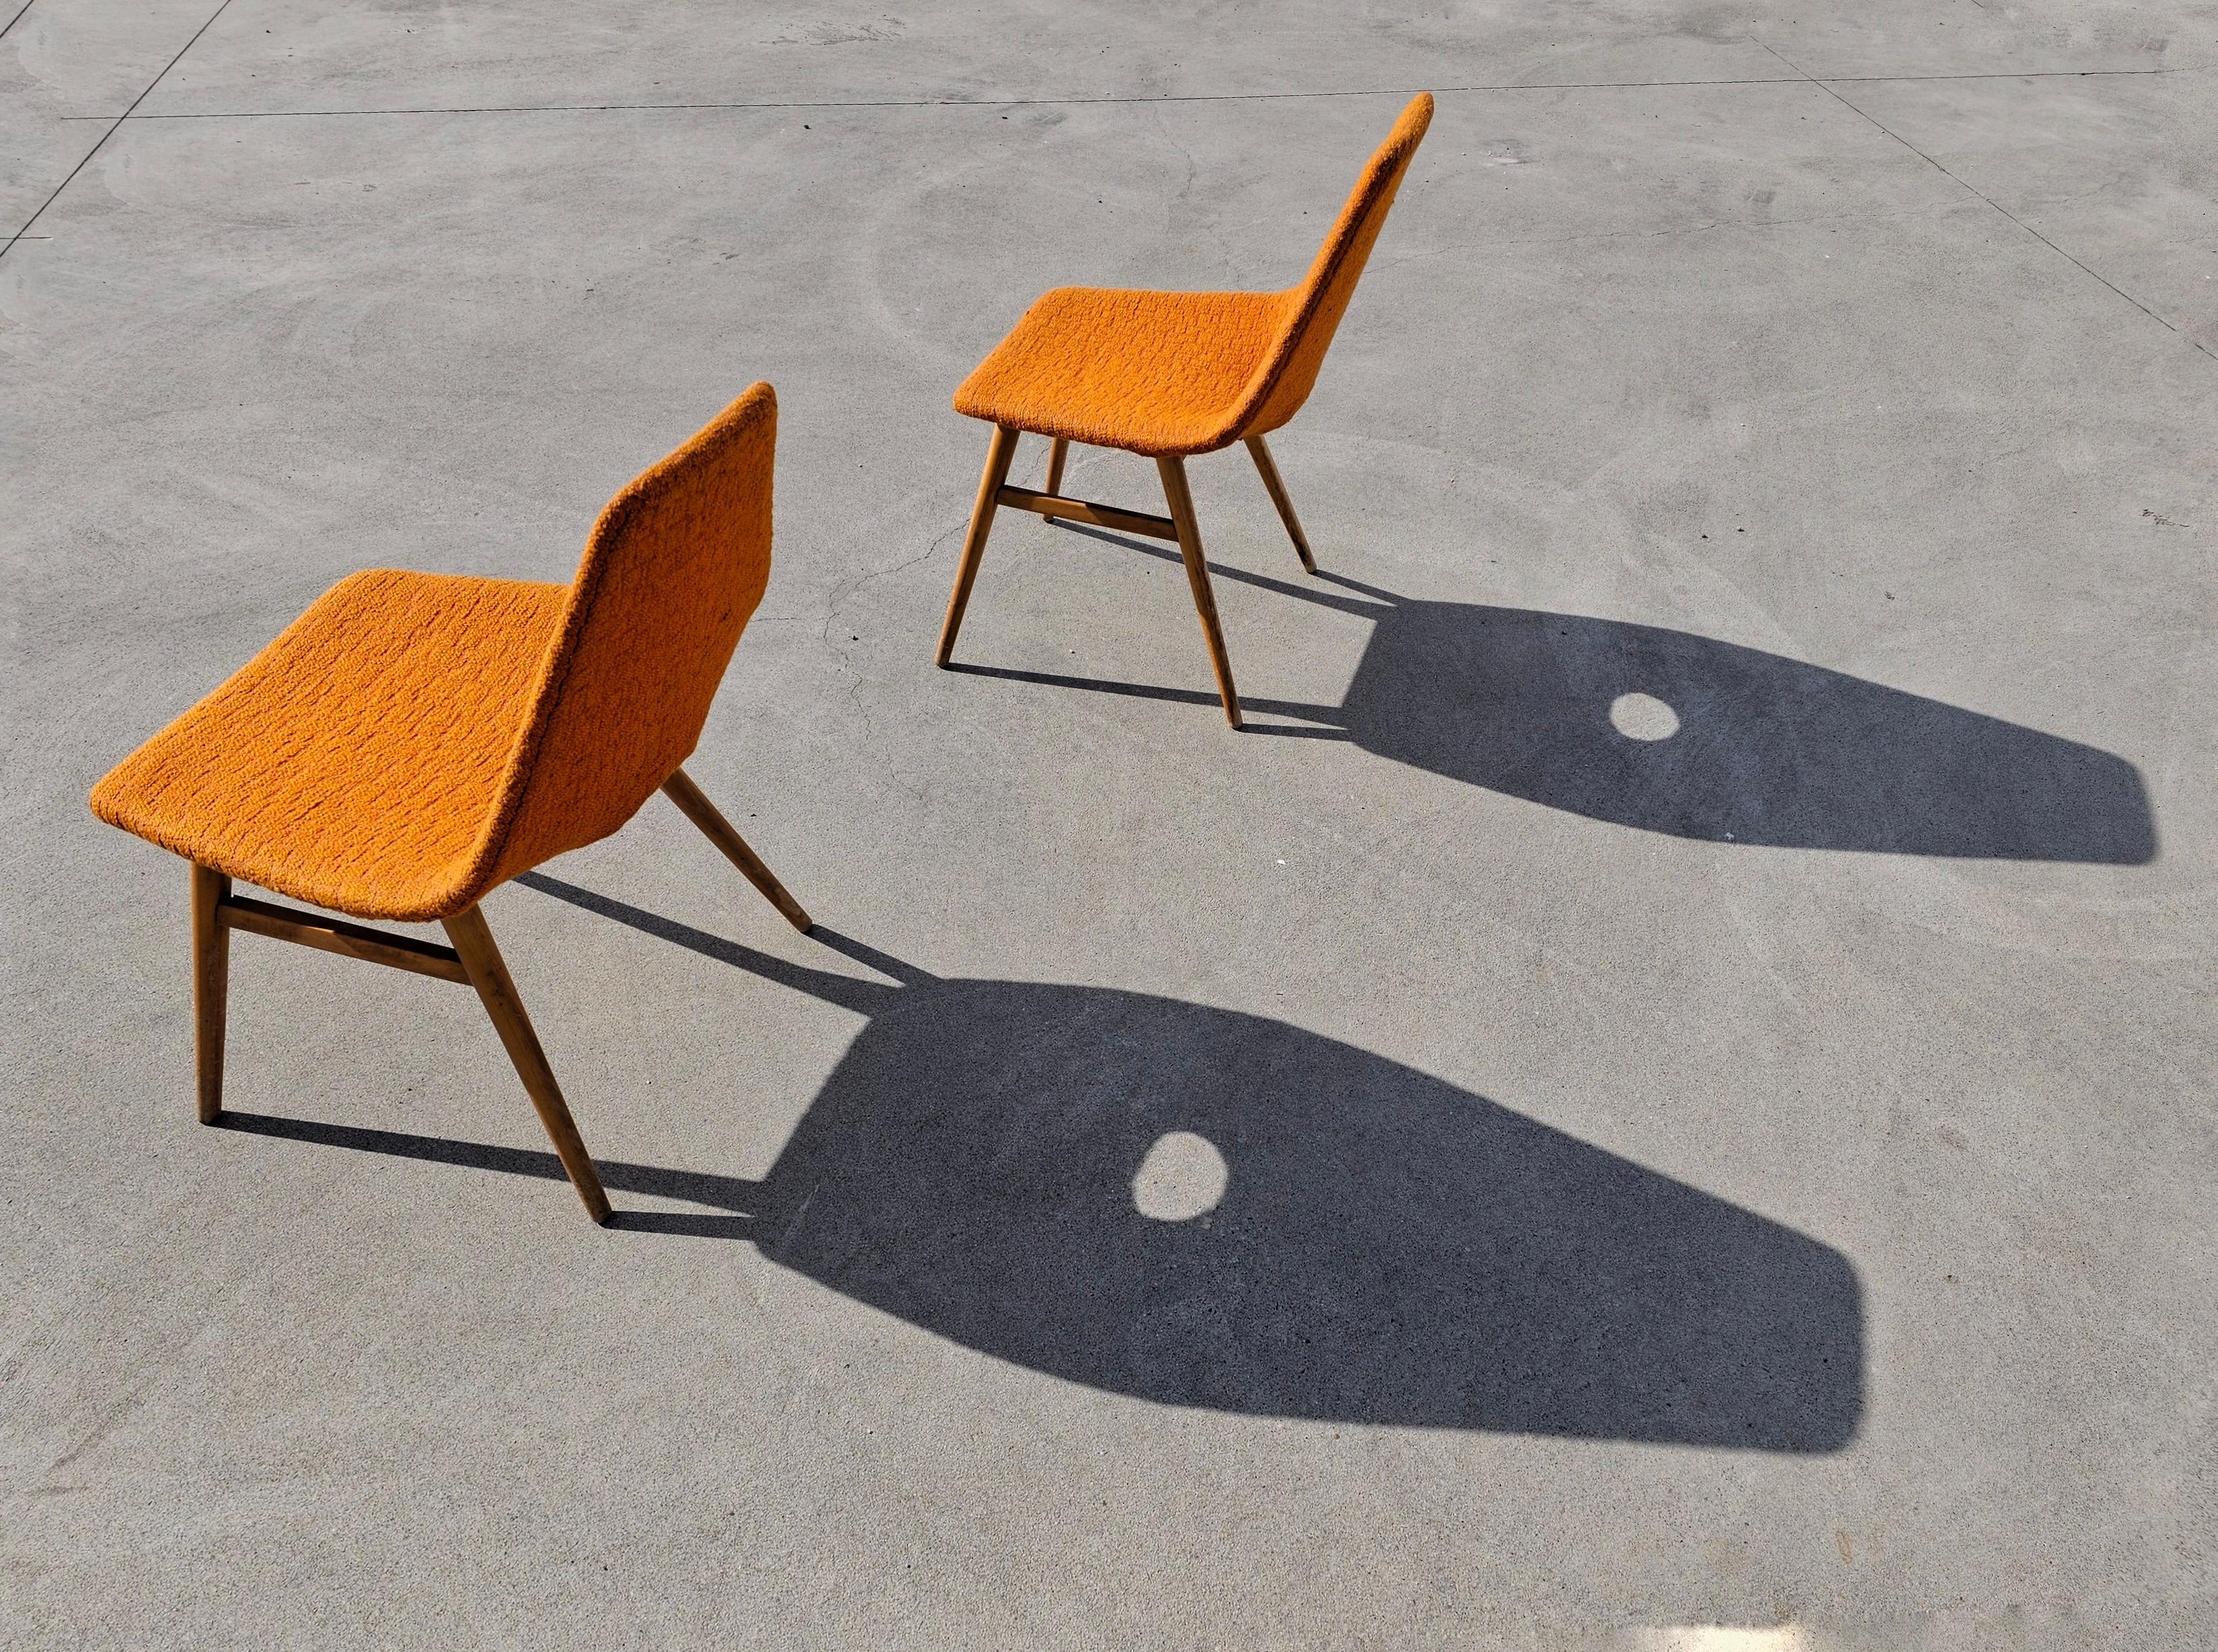 Hungarian Pair of Mid-Century Modern Side Chairs by Judit Burian and Erika Szek, 1950s For Sale